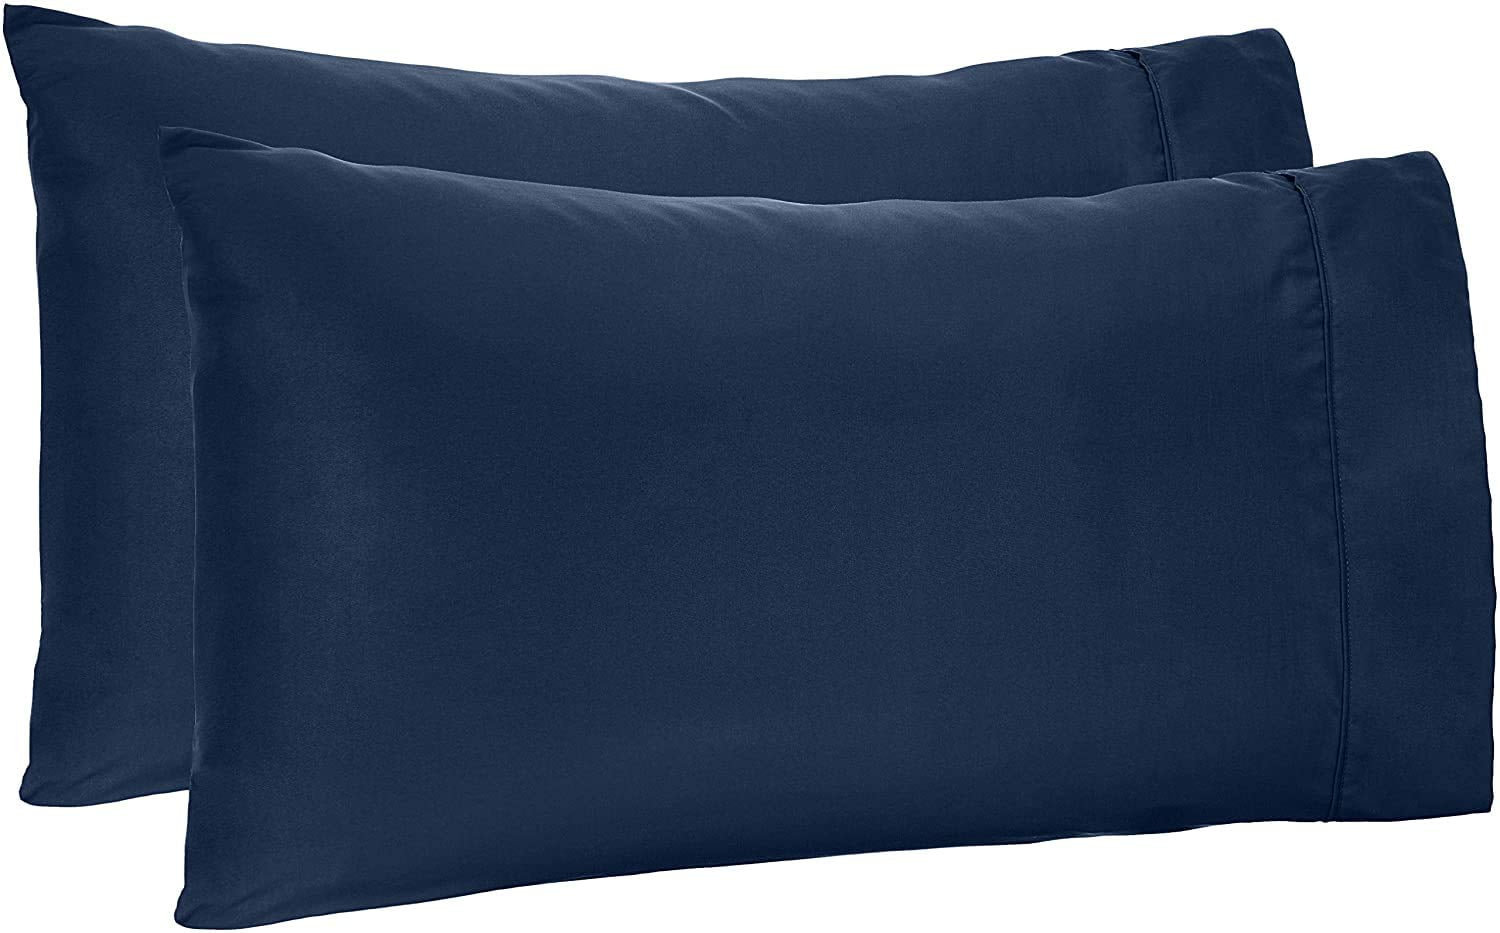 CCWB Oversize Pillow Case Extra Large Fits Even The Fluffiest Pillows Including The Pancake Pillow Extra Tall Pillowcase 100% Egyptian Cotton 600 Thread Count Small Rectangle 14 X 22 Black